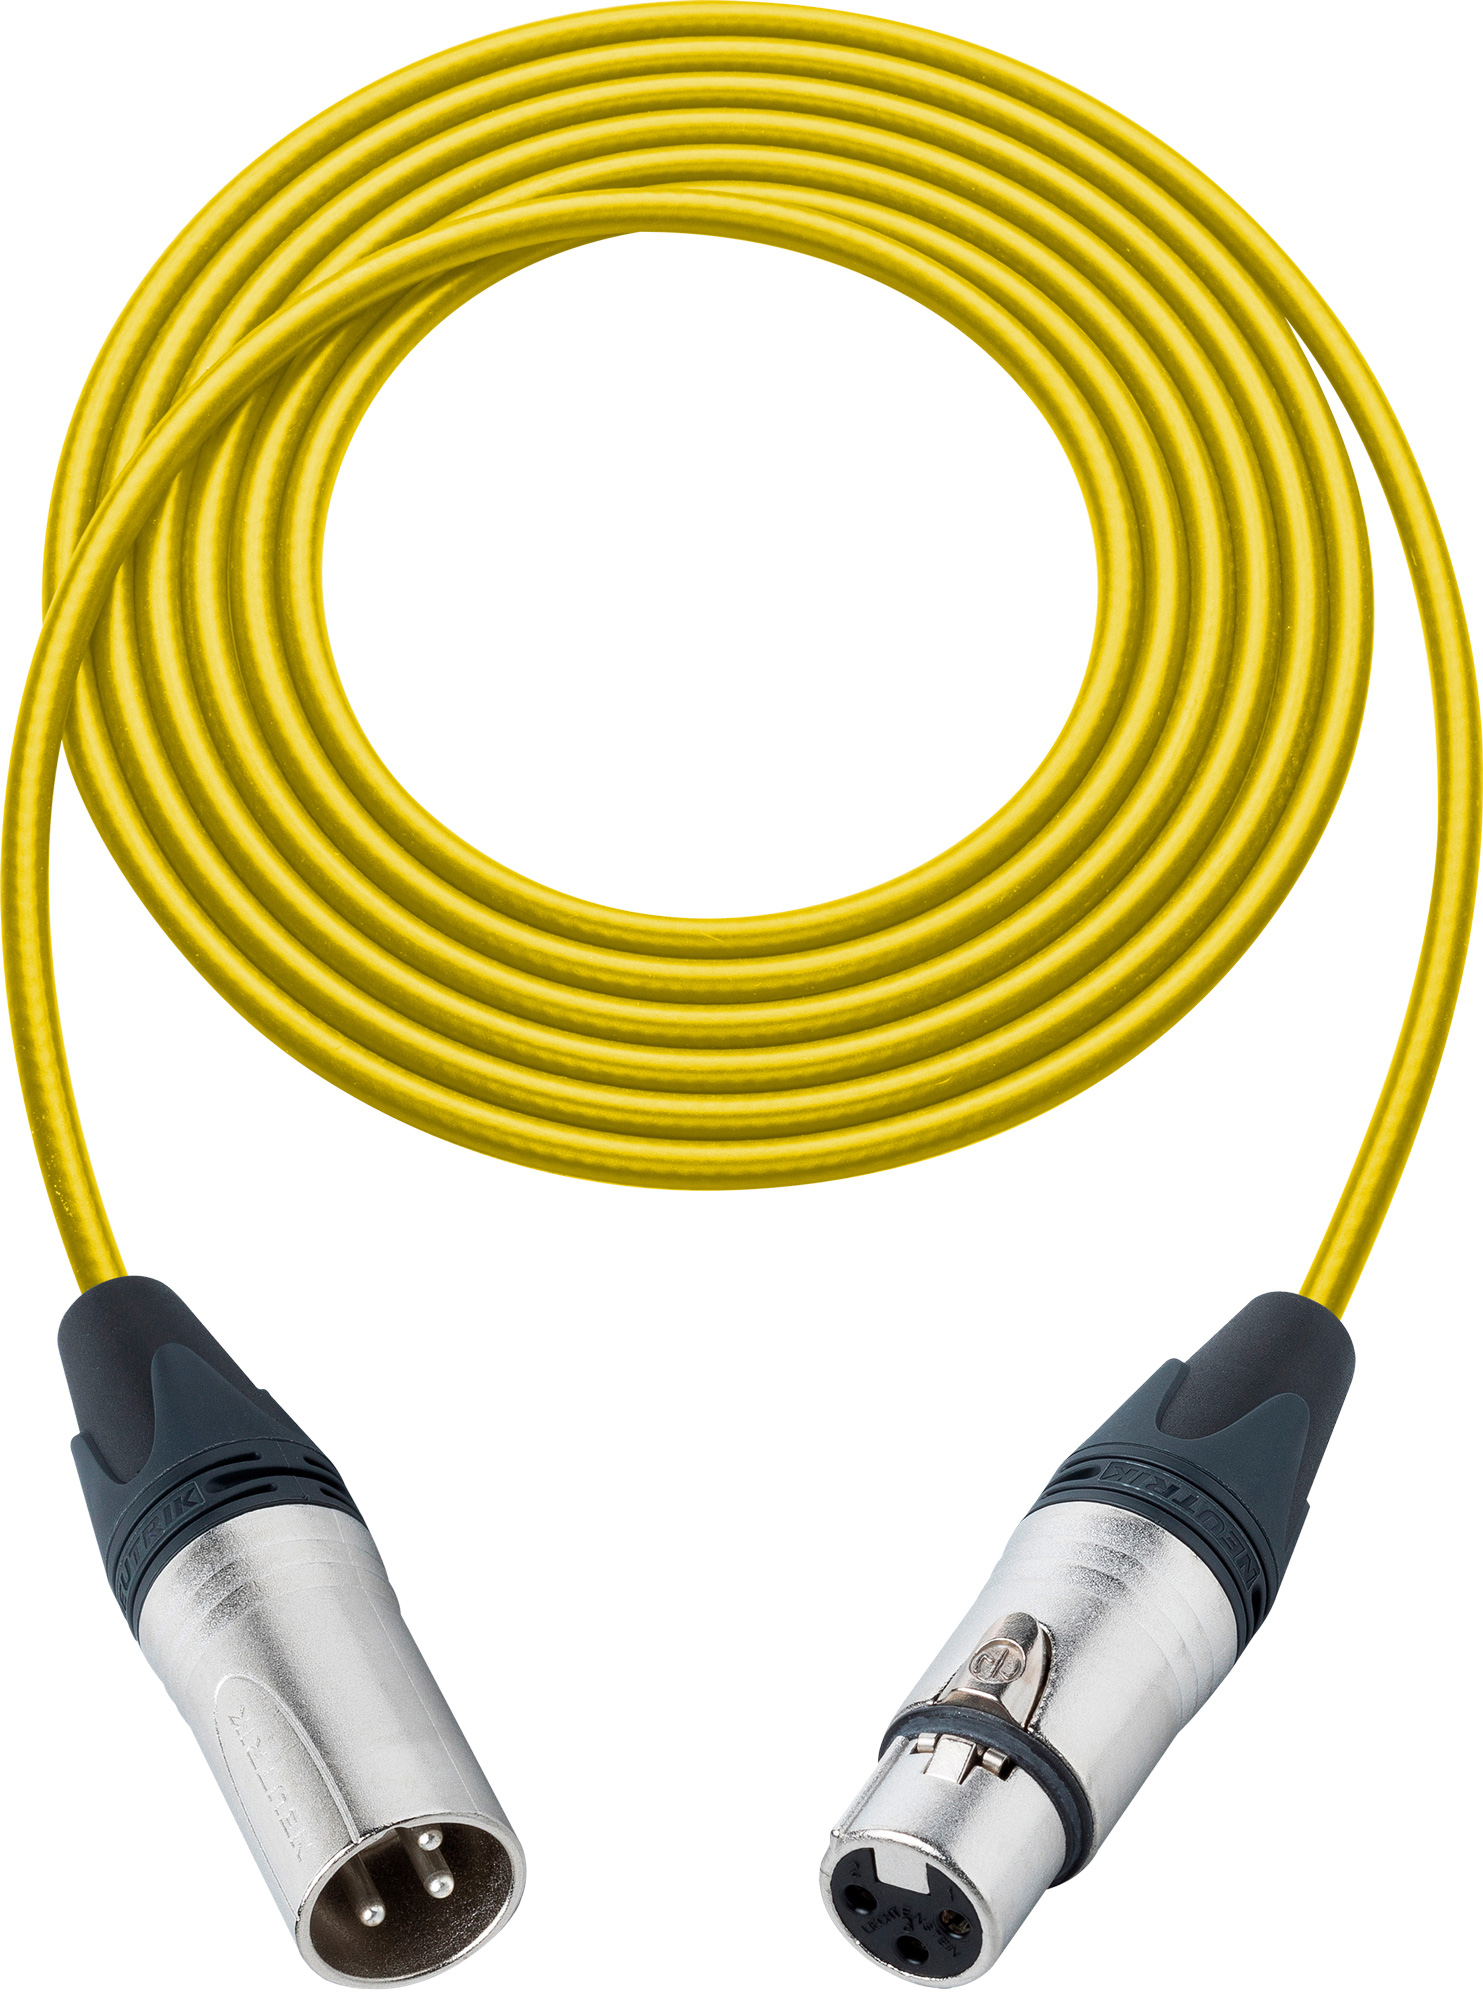 Pro Stage Series XLR Cable - 100 feet YELLOW L2-100XXJYW